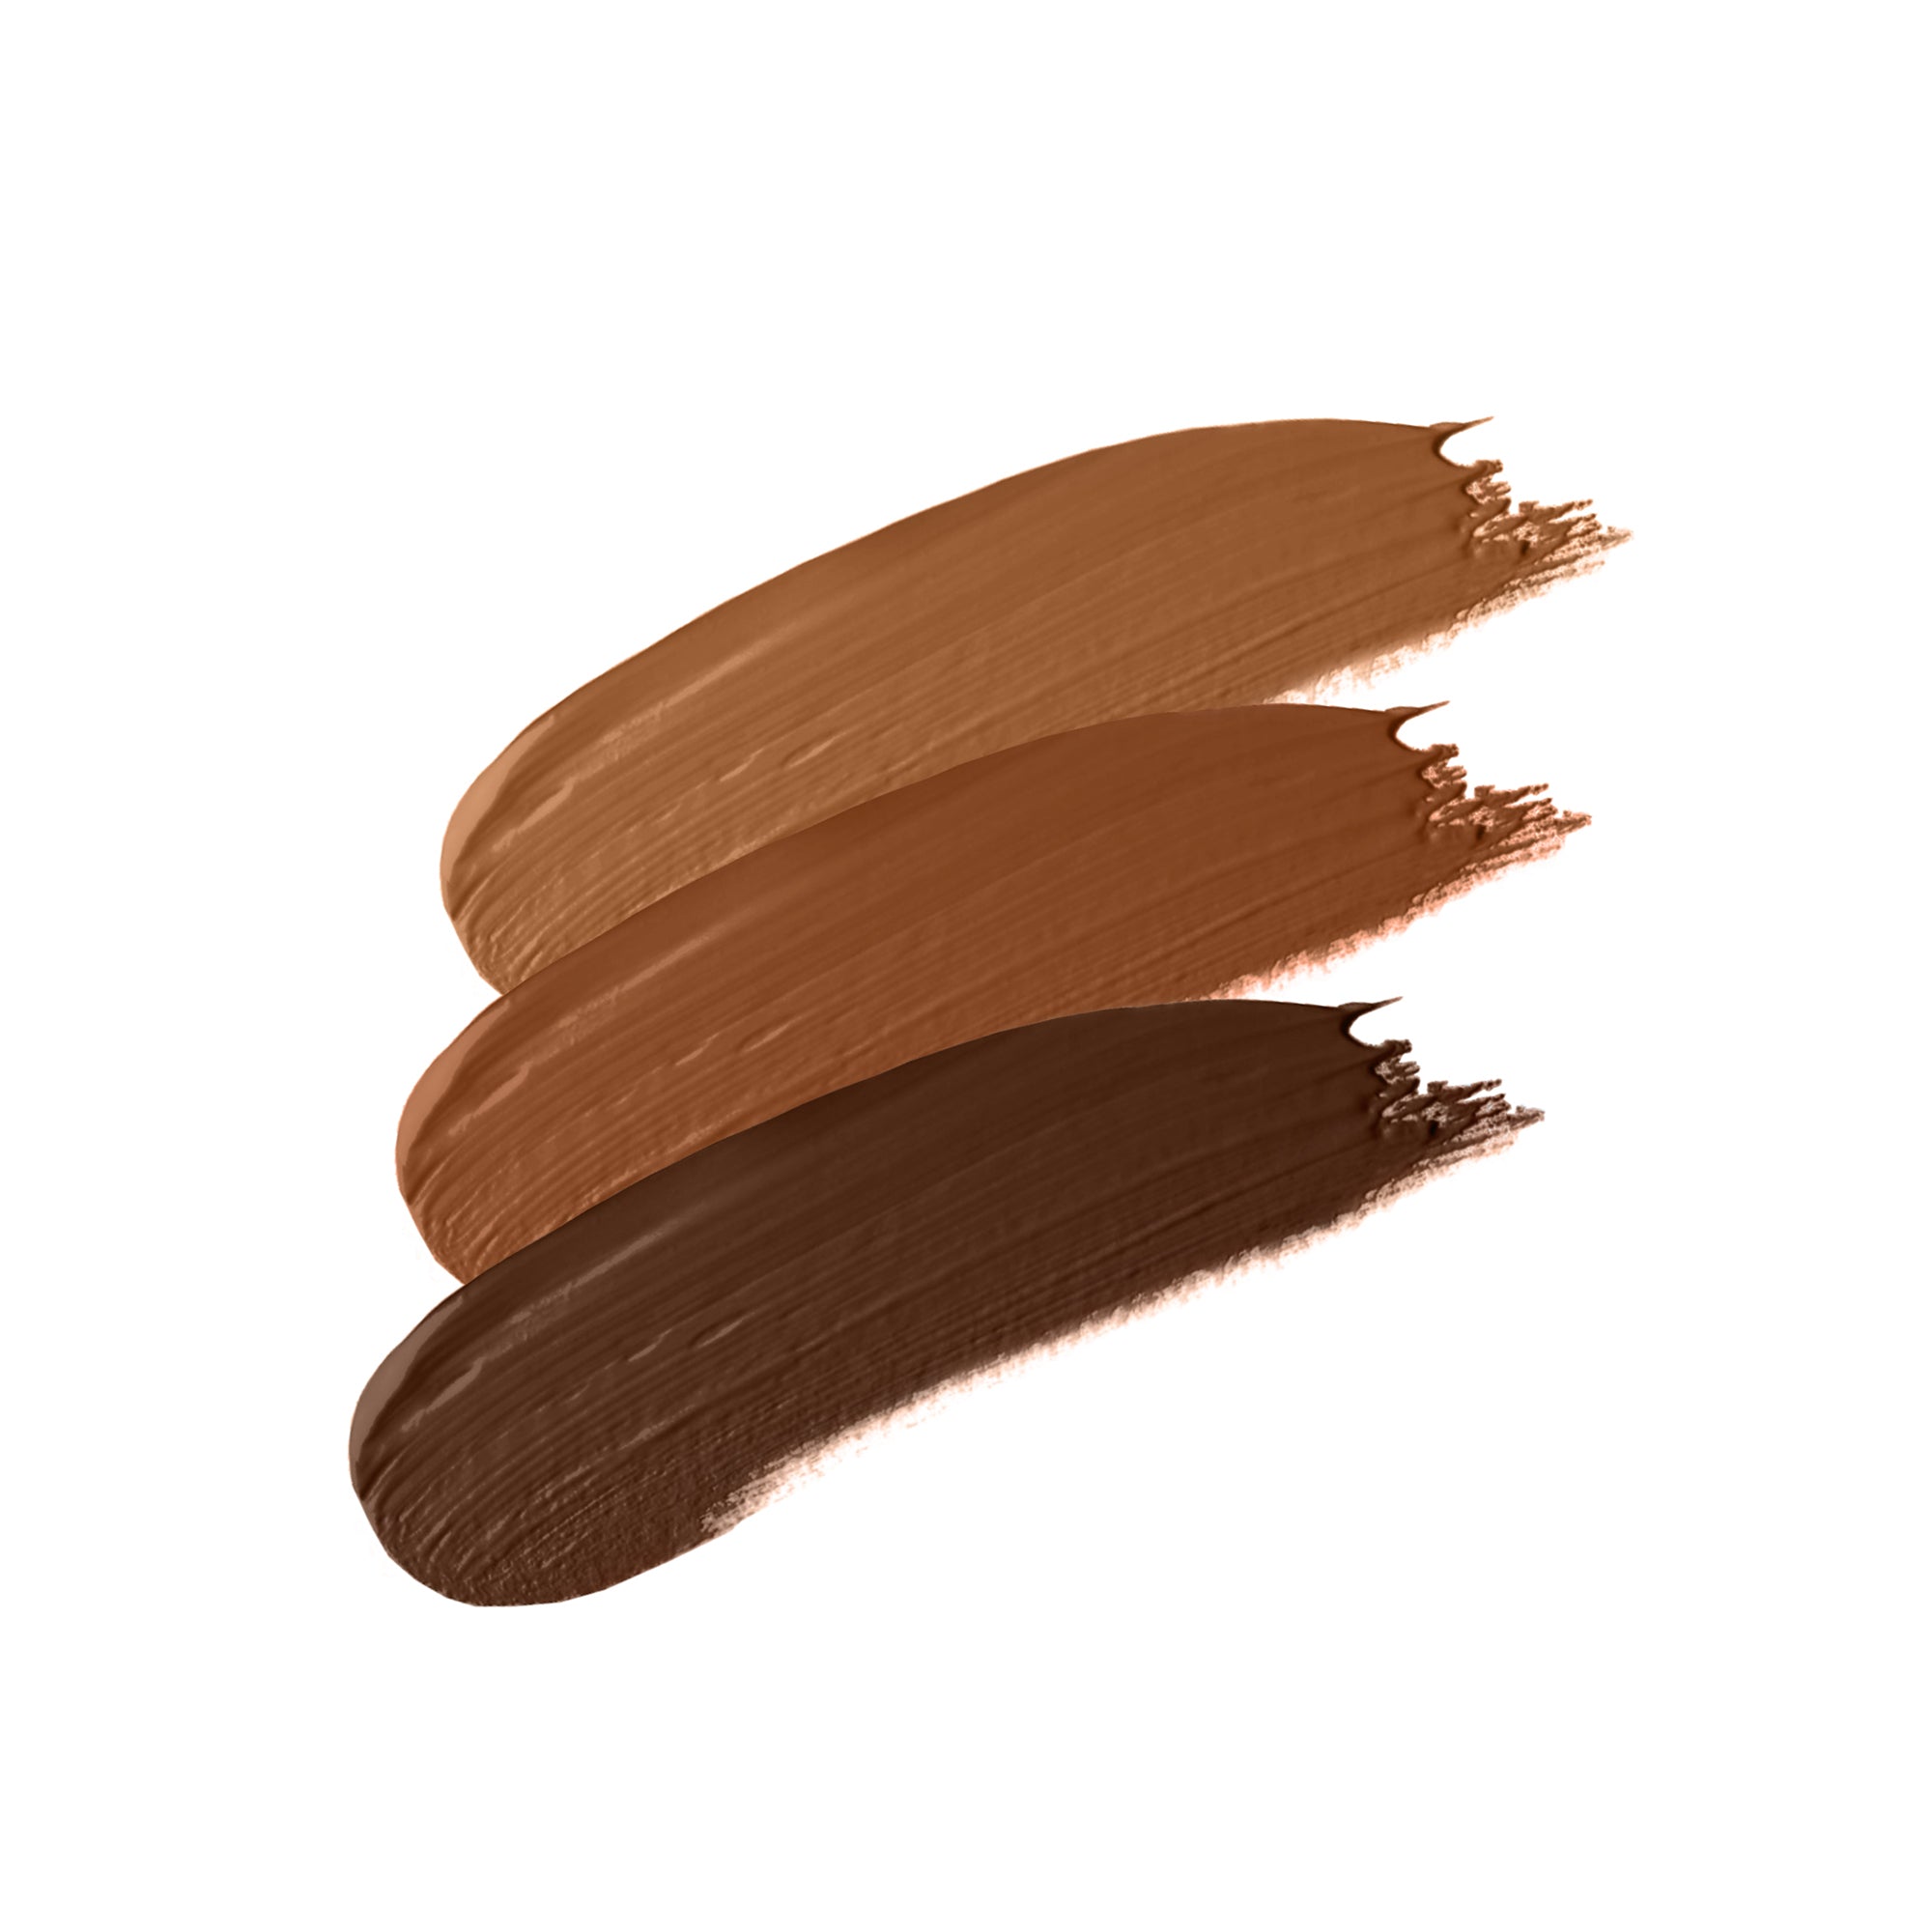 9 - CHOCOLATE - buildable, creamy, hydrating concealer in chocolate undertone shade nine in group shot